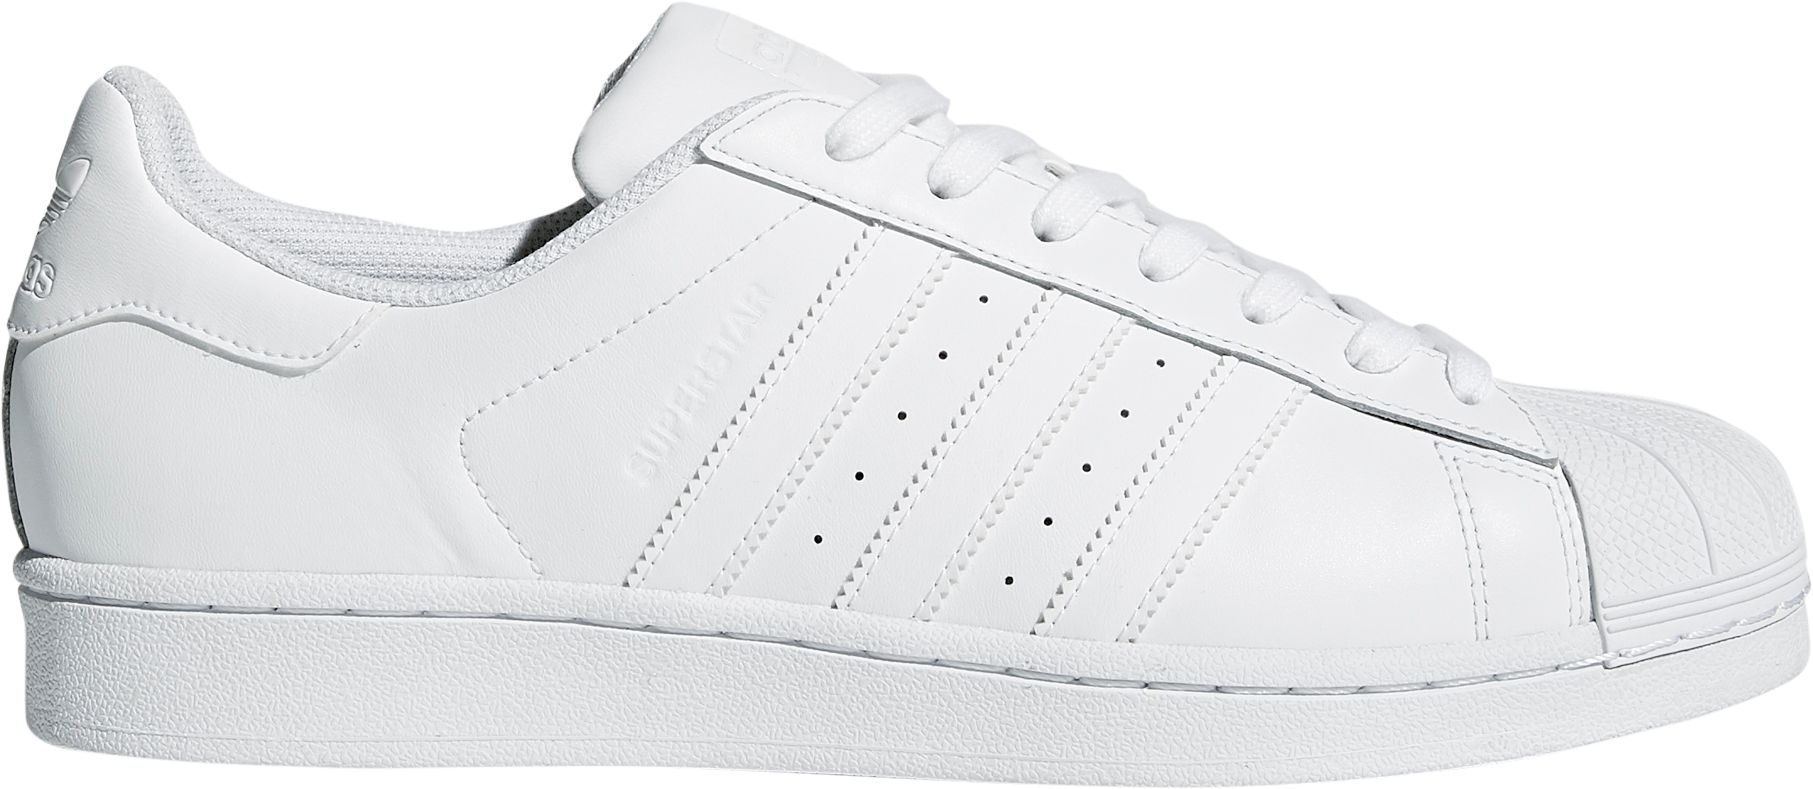 cheapest adidas superstar shoes